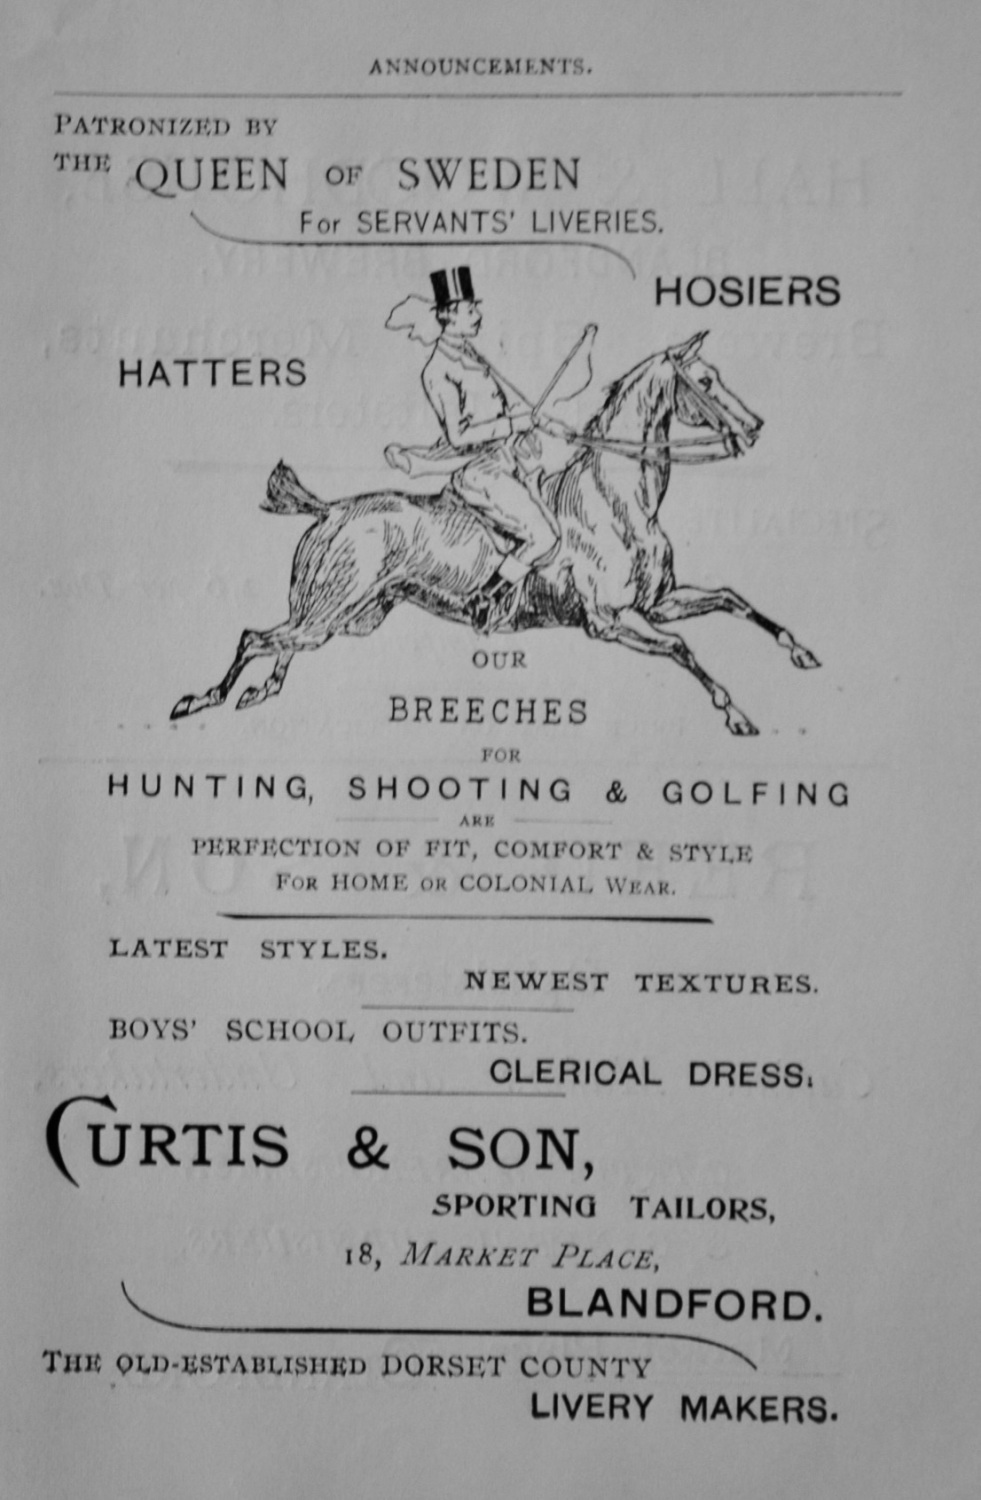 Curtis & Son, Sporting Tailors, 18, Market Place, Blandford.